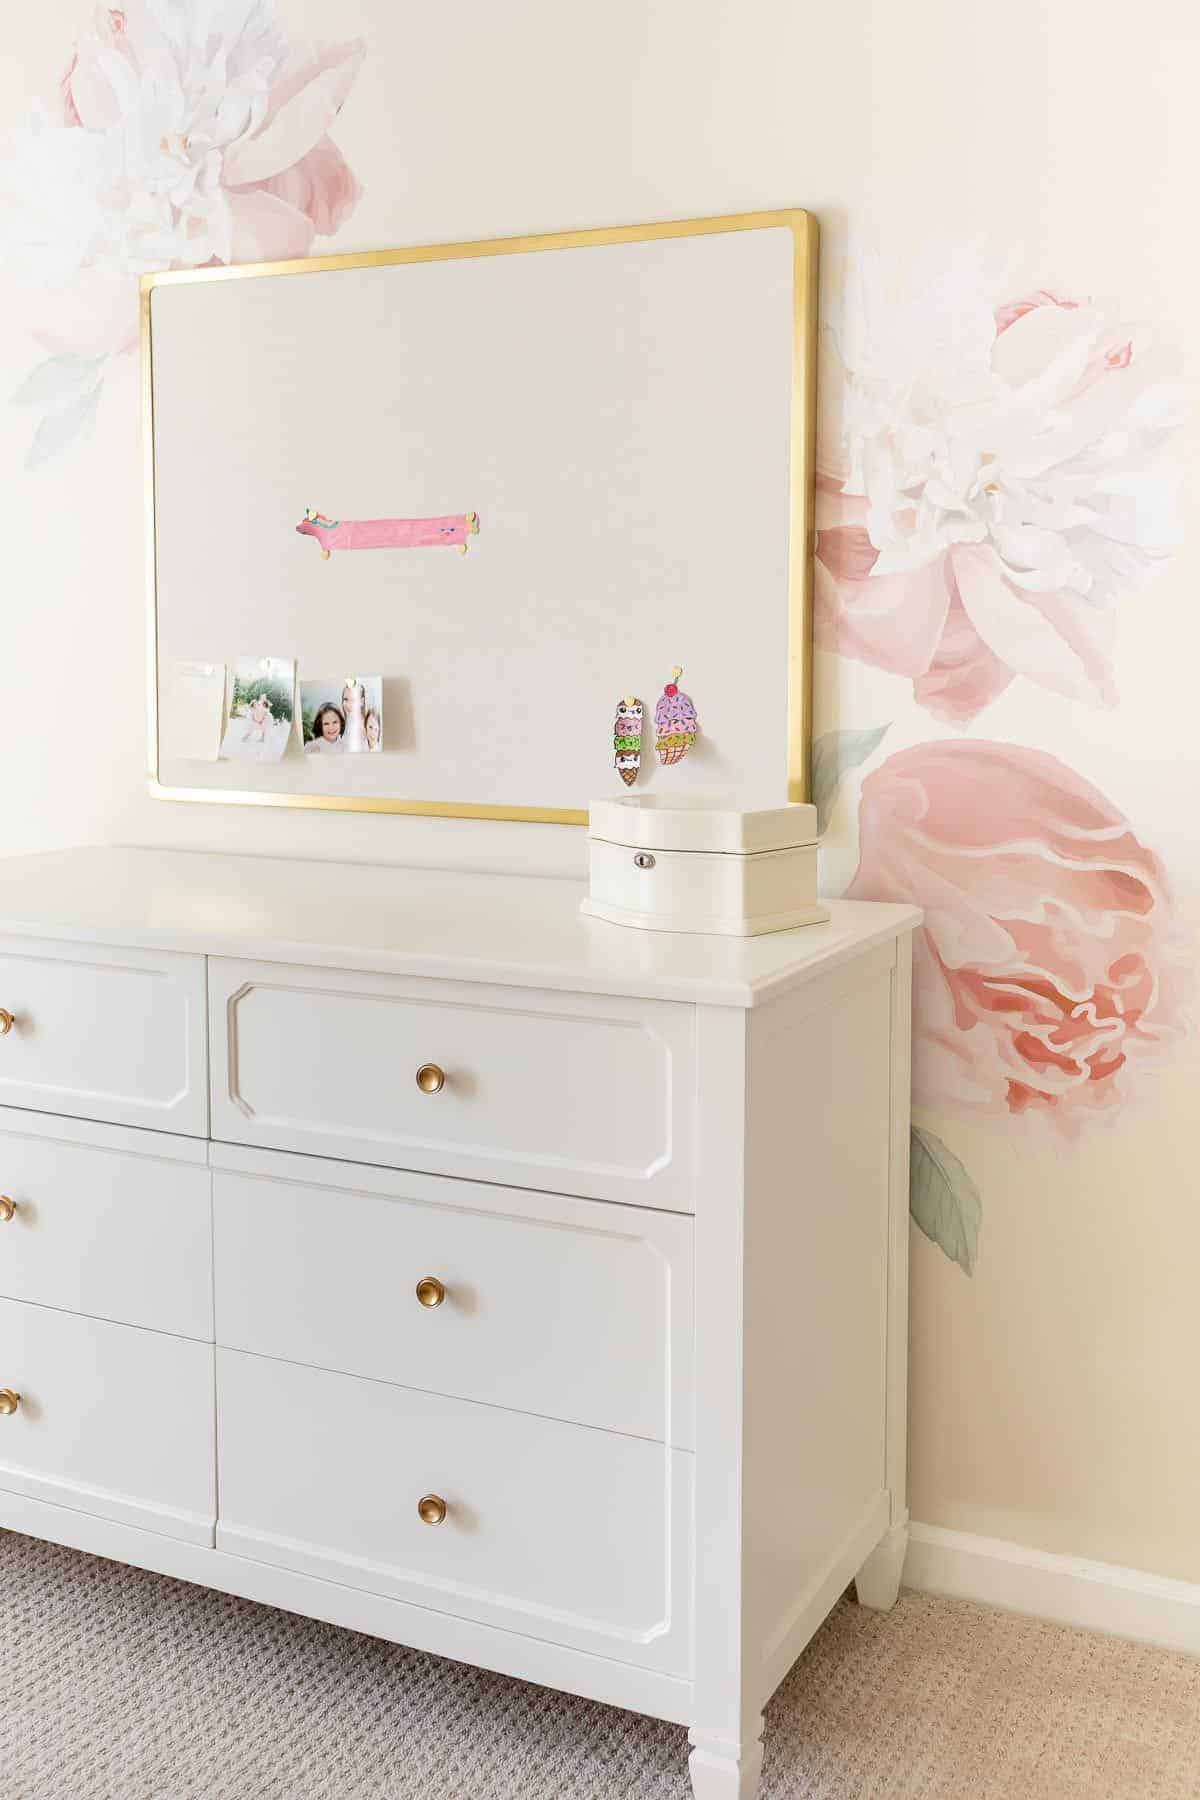 A floral decal on the wall of a pink and gold girly bedroom.